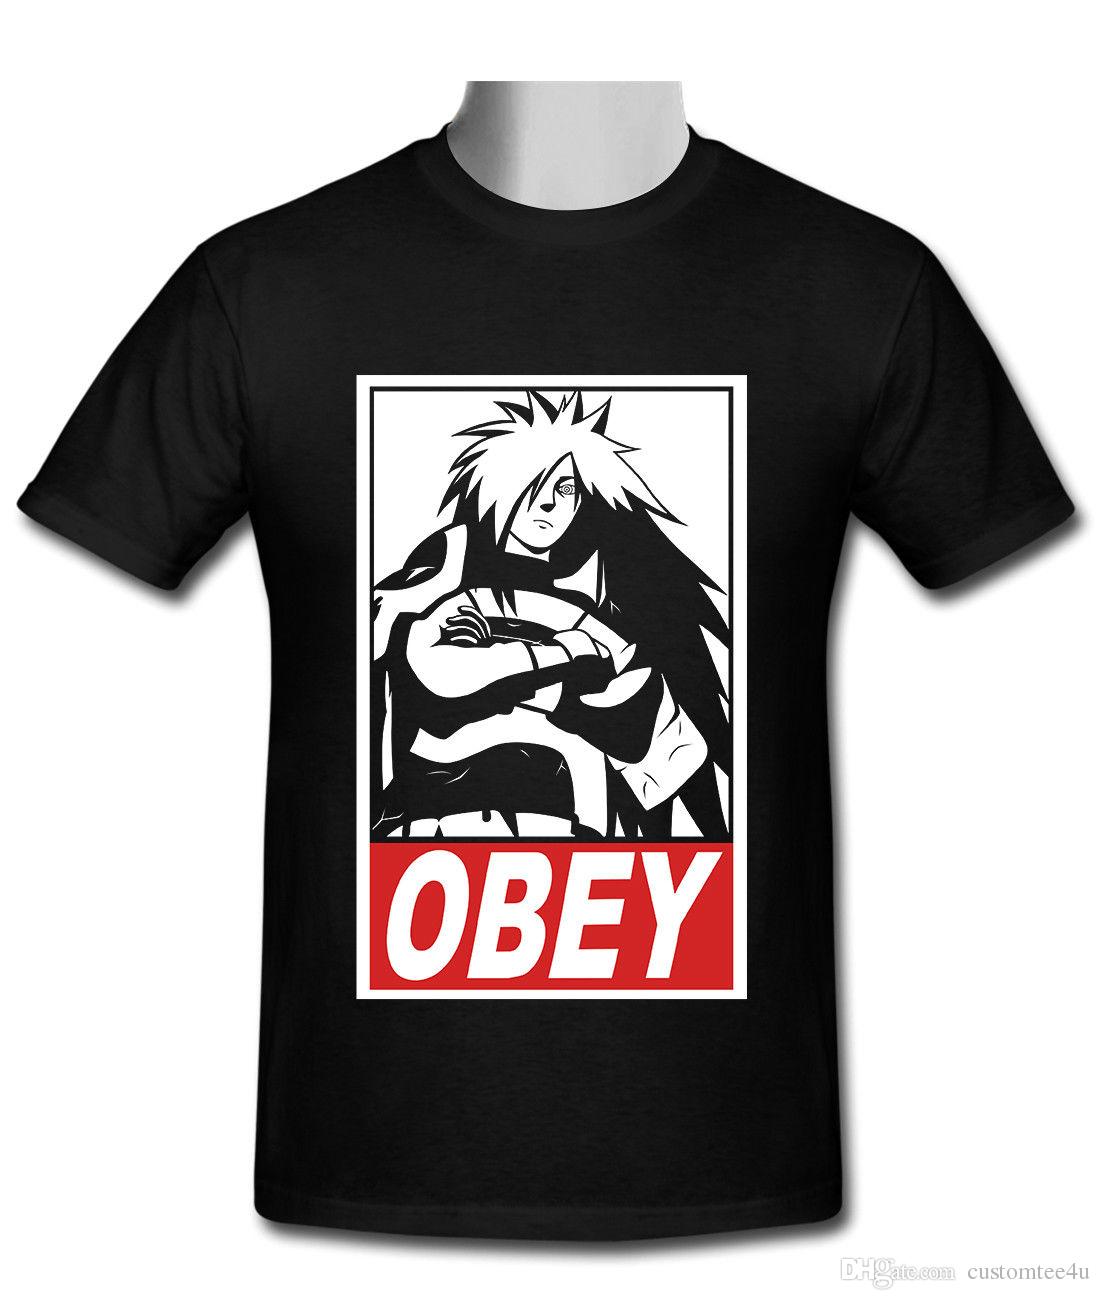 Team Obey Logo - OBEY Madara Uchiha Support Dropship Black T Shirt Size S To 2XL T